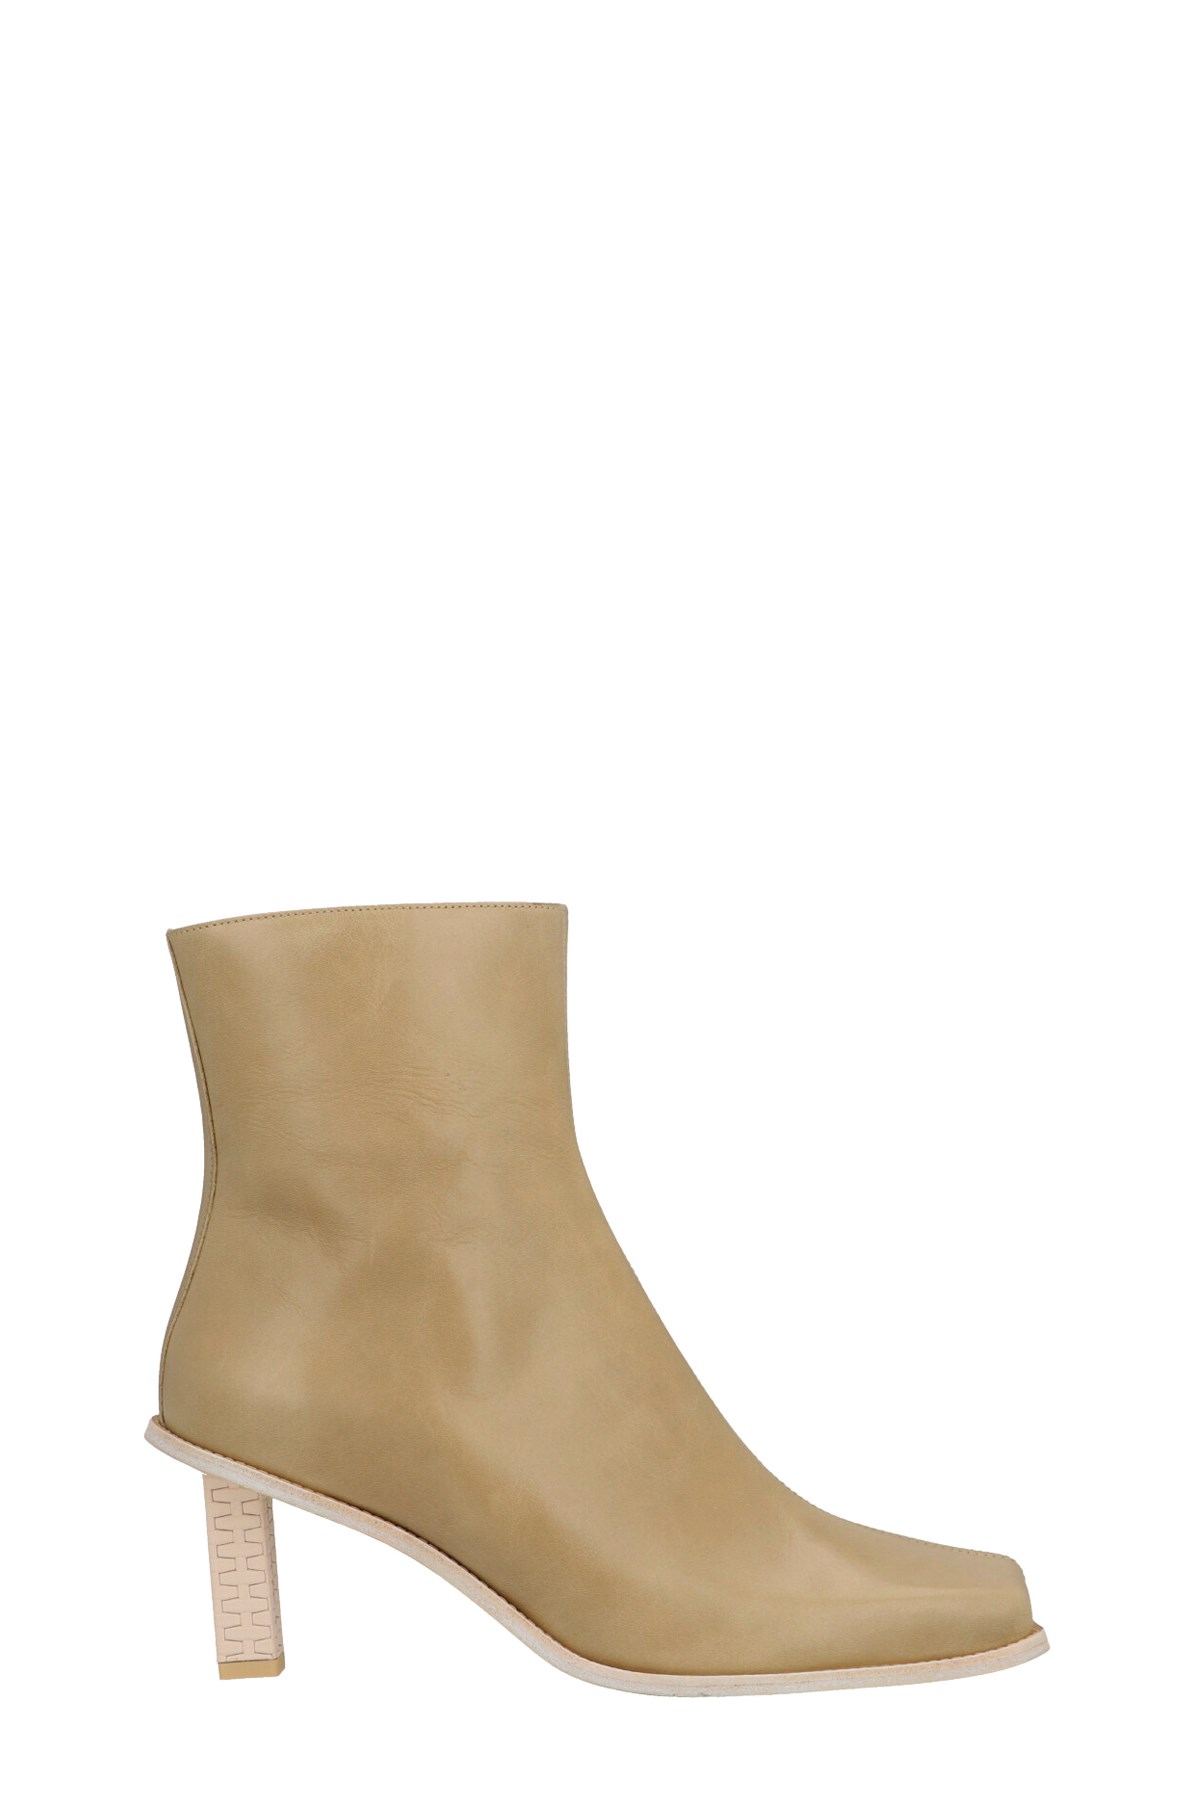 JACQUEMUS 'Carro Basses' Ankle Boots